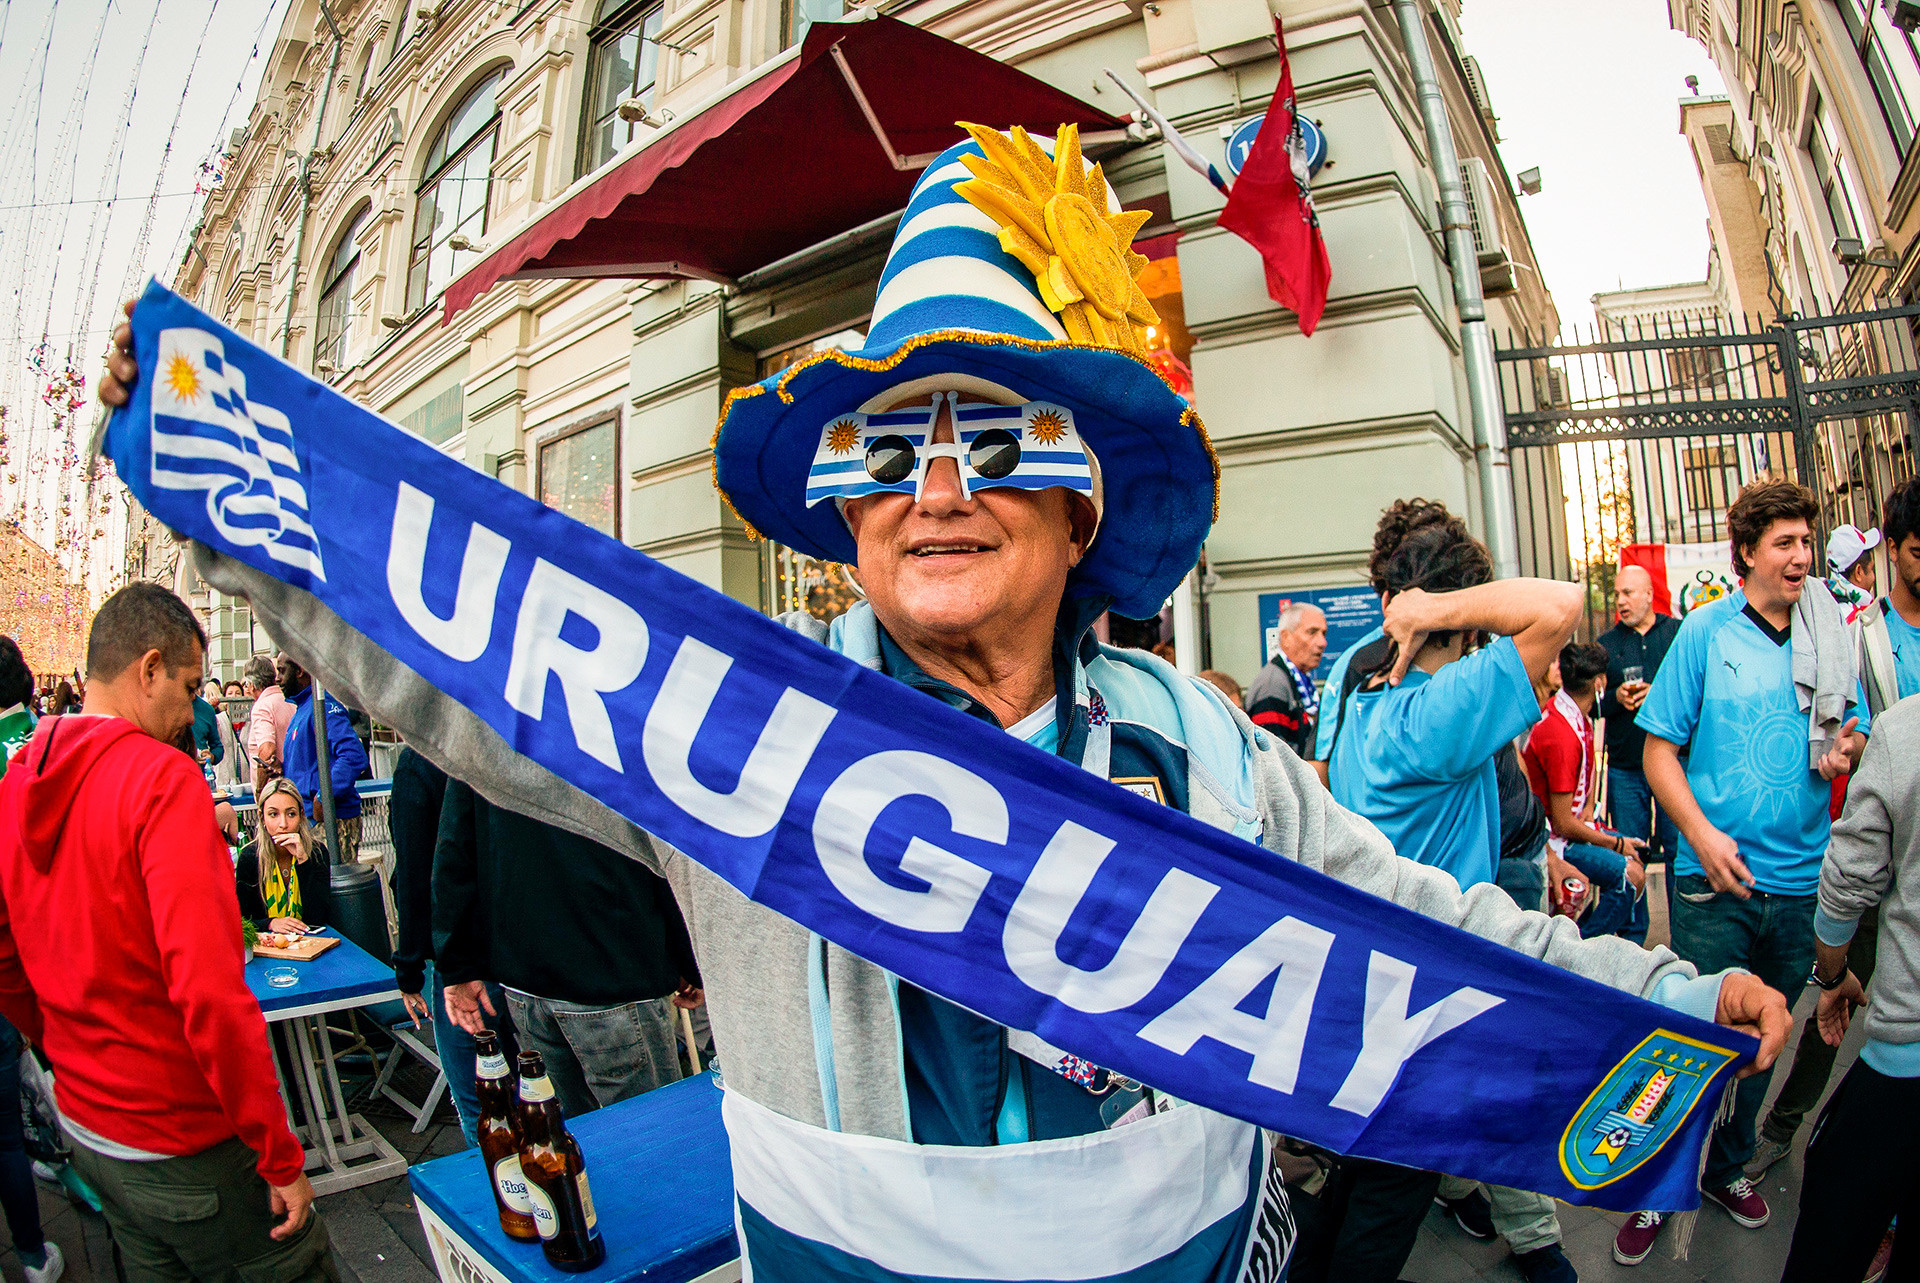 Uruguayans have been among the loudest supporters in Moscow so far. Their side is looking to break Russian hearts with the terrifying front pairing of Luis Suarez and Edinson Cavani.